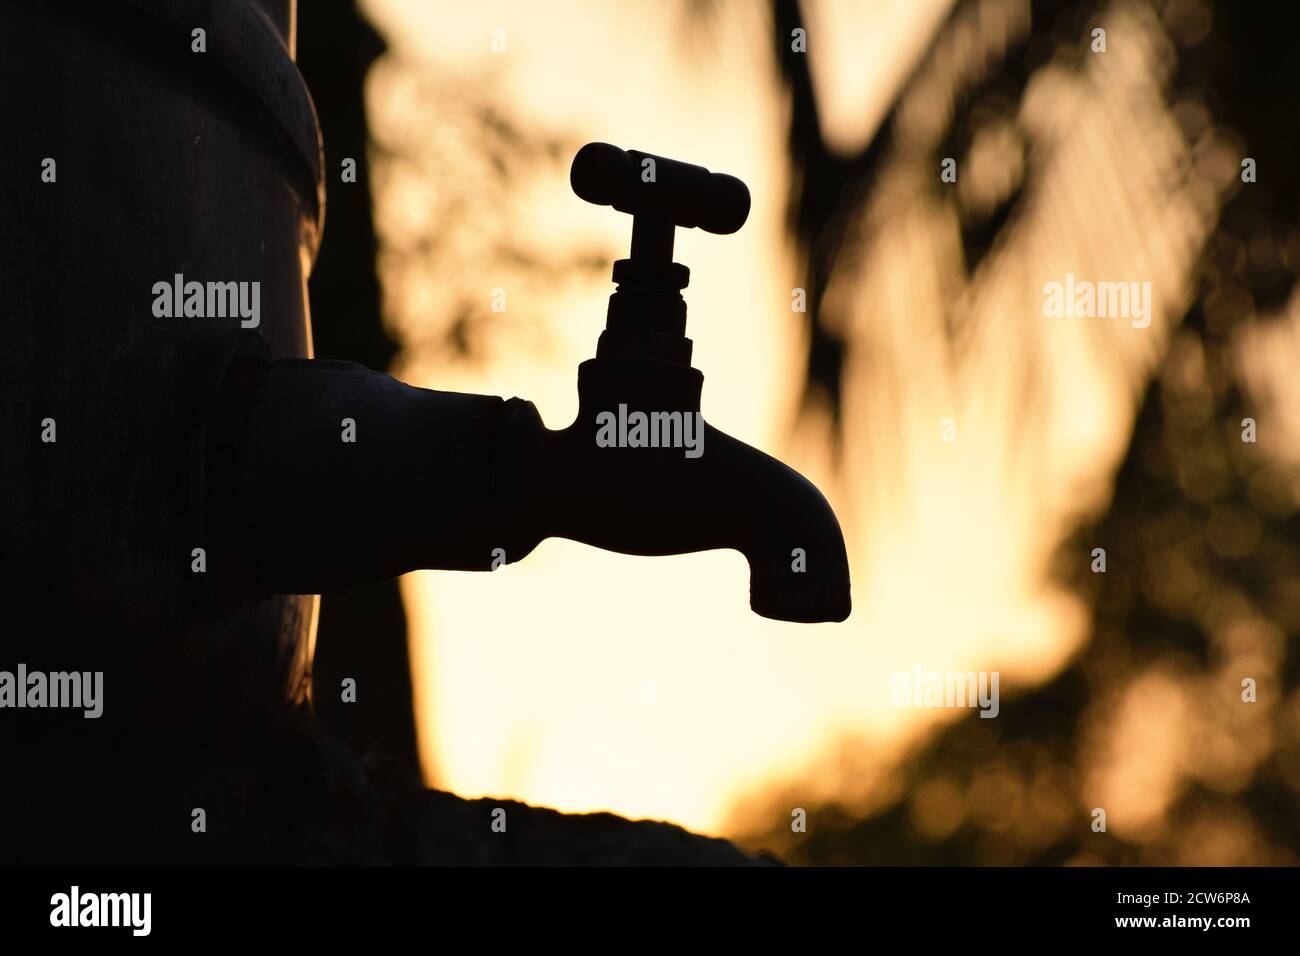 Silhouette of old vintage metal faucet/tap alone in an outdoor natural environment during golden hour of sunrise, water shortage, beautiful wallpaper Stock Photo